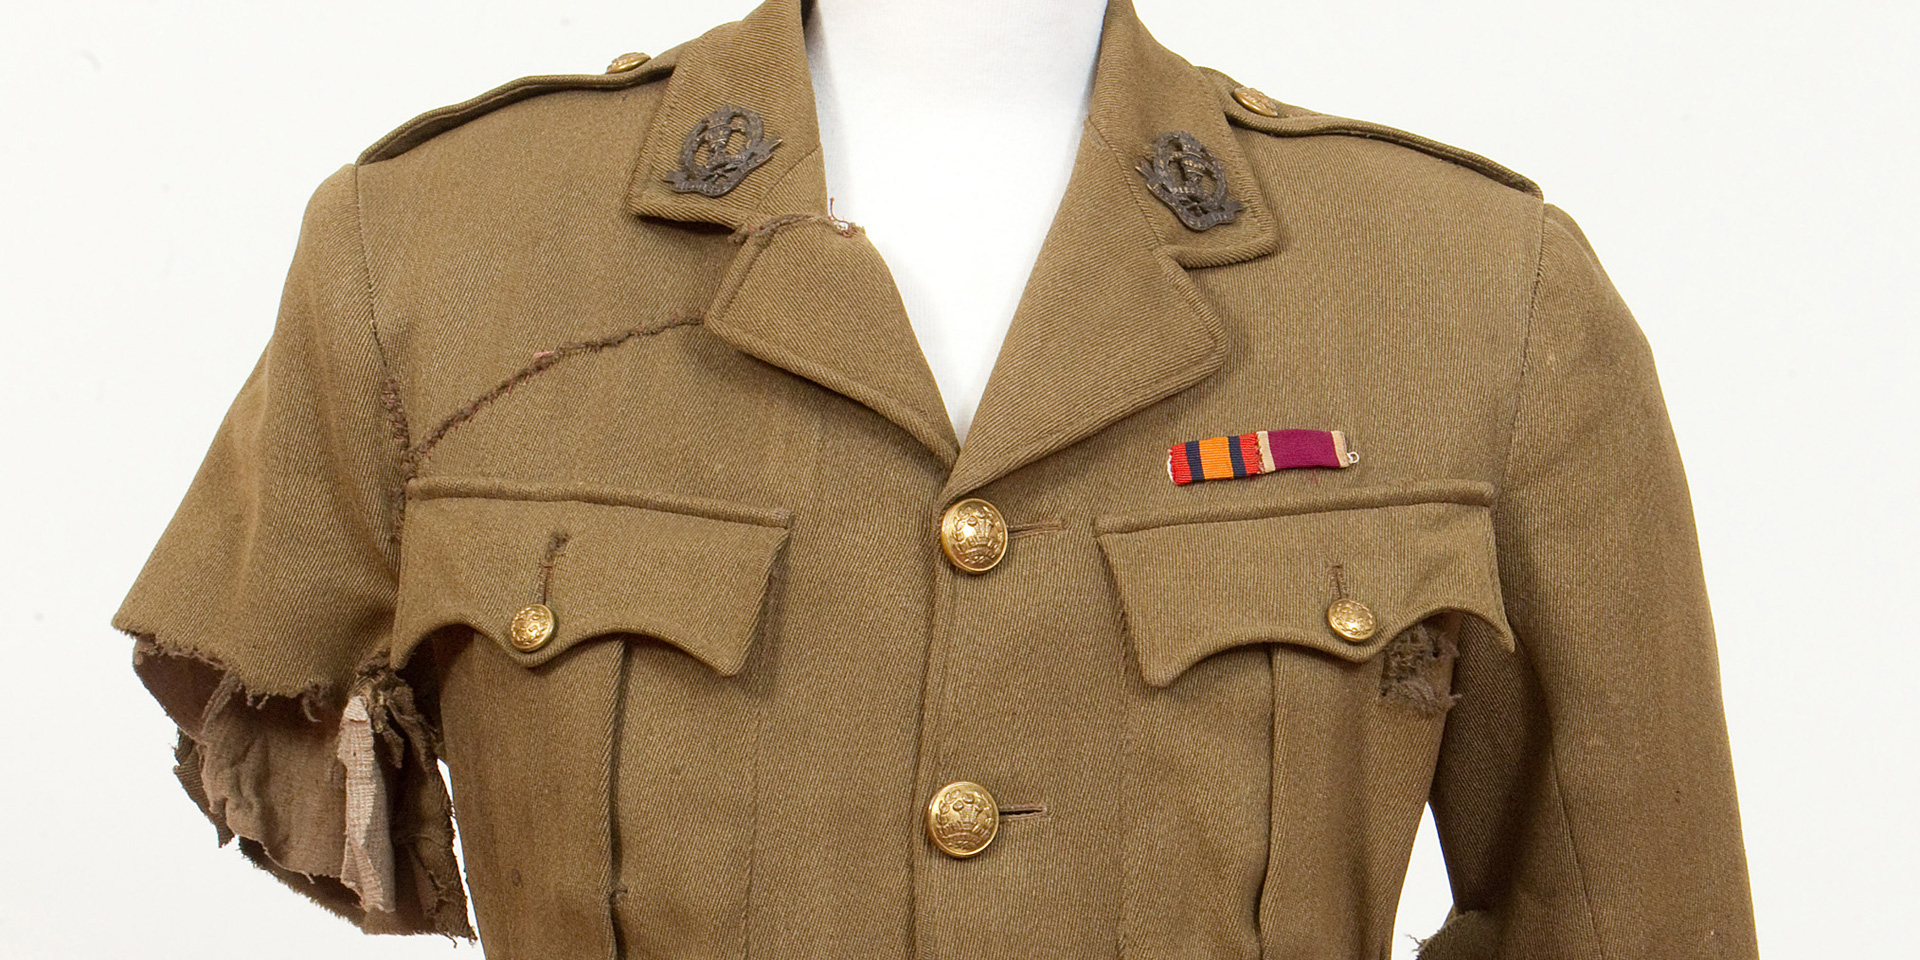 Tunic worn by Captain George Johnson, 1 July 1916